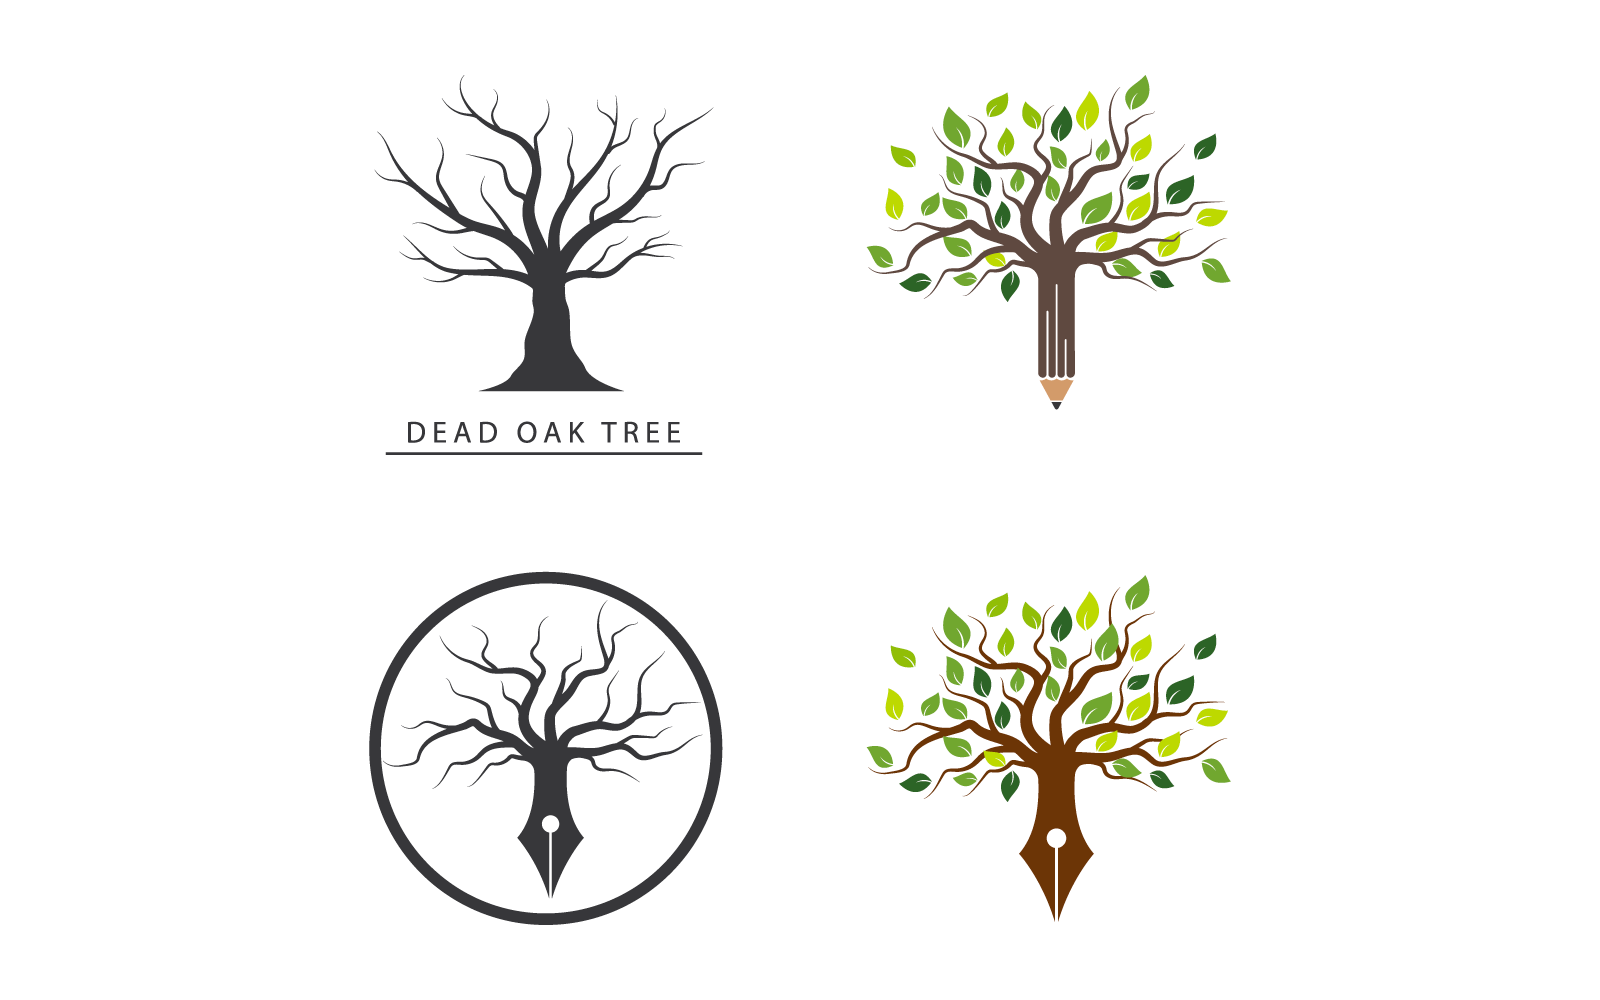 Tree with pencil illustration vector design